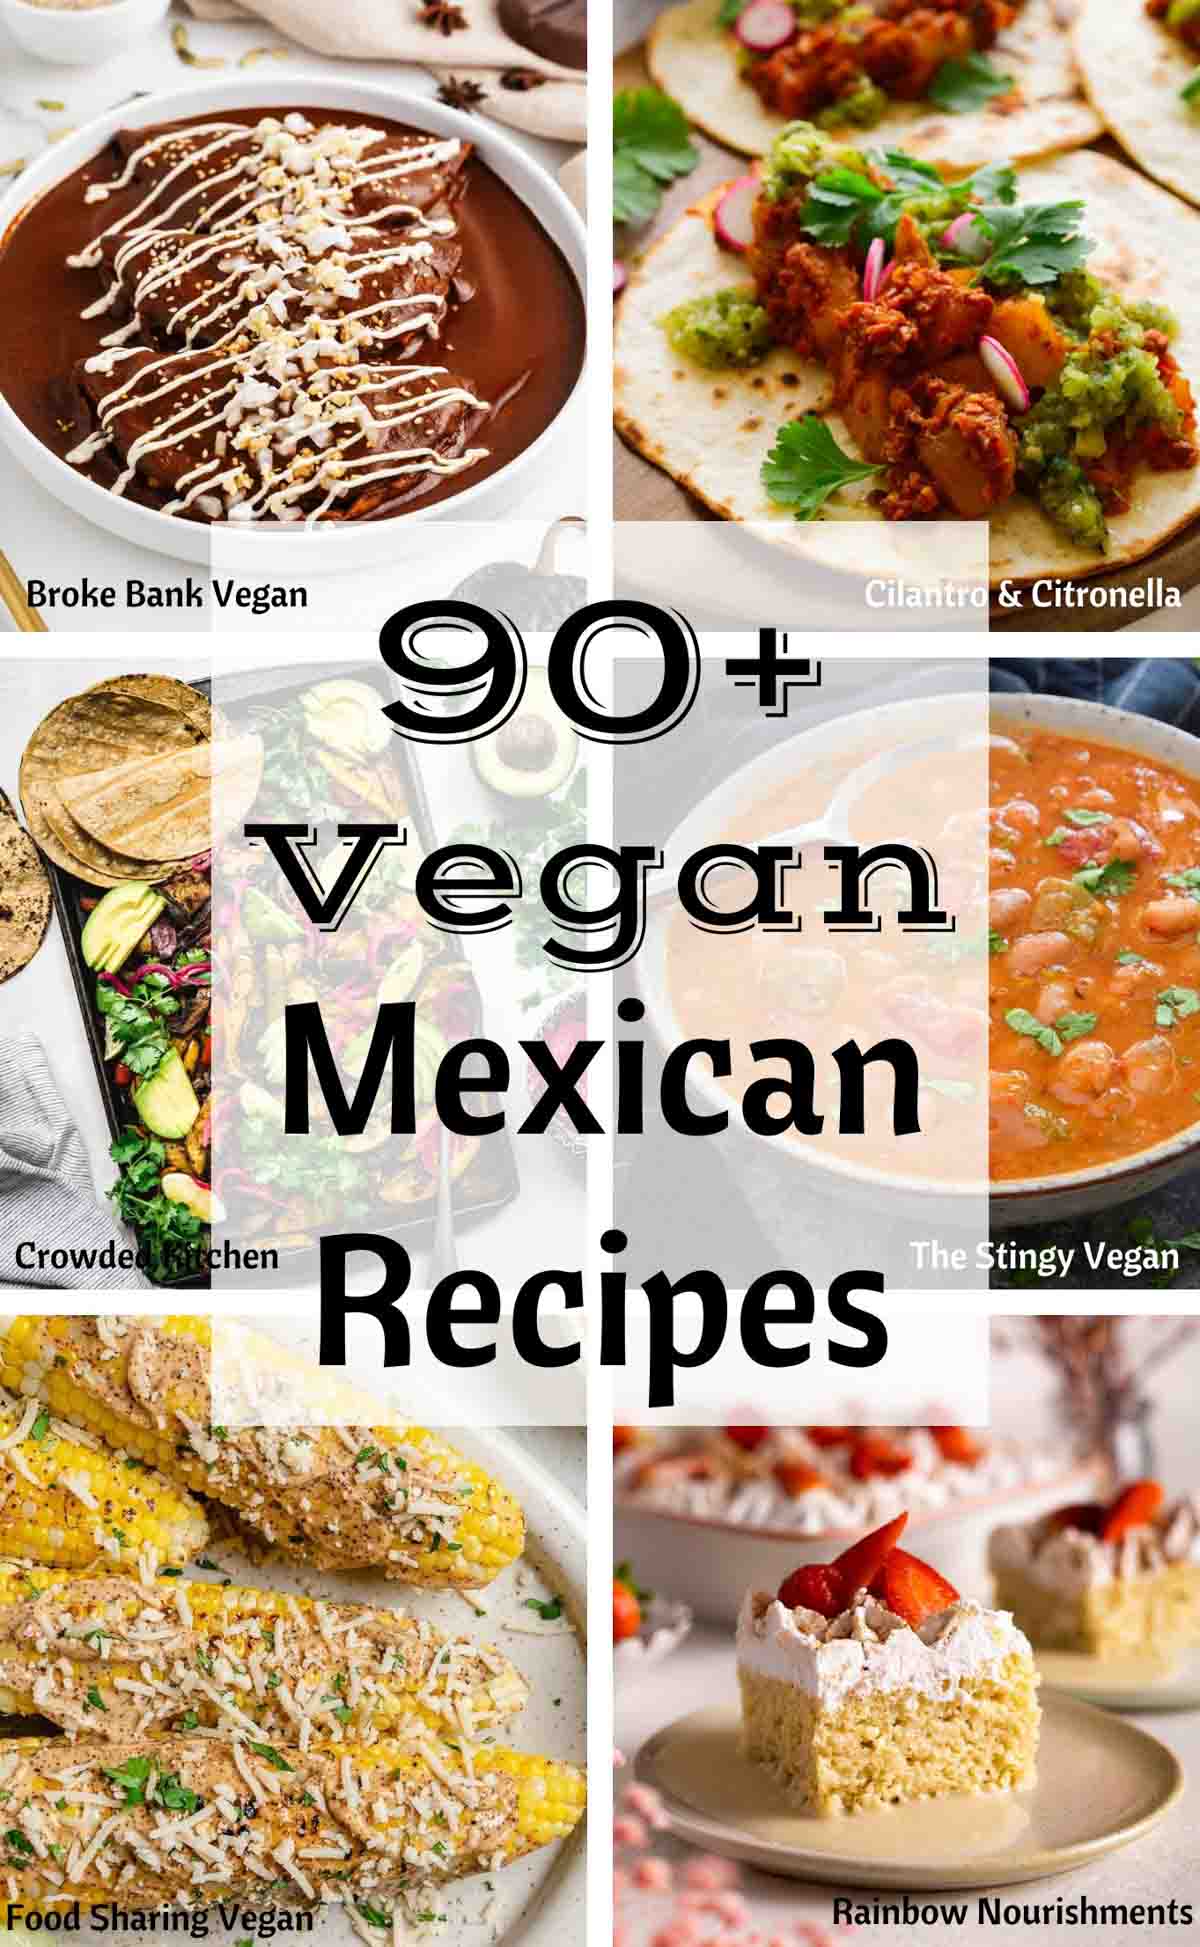 A collage image of six dishes and the title "90+ vegan Mexican recipes" in the middle.